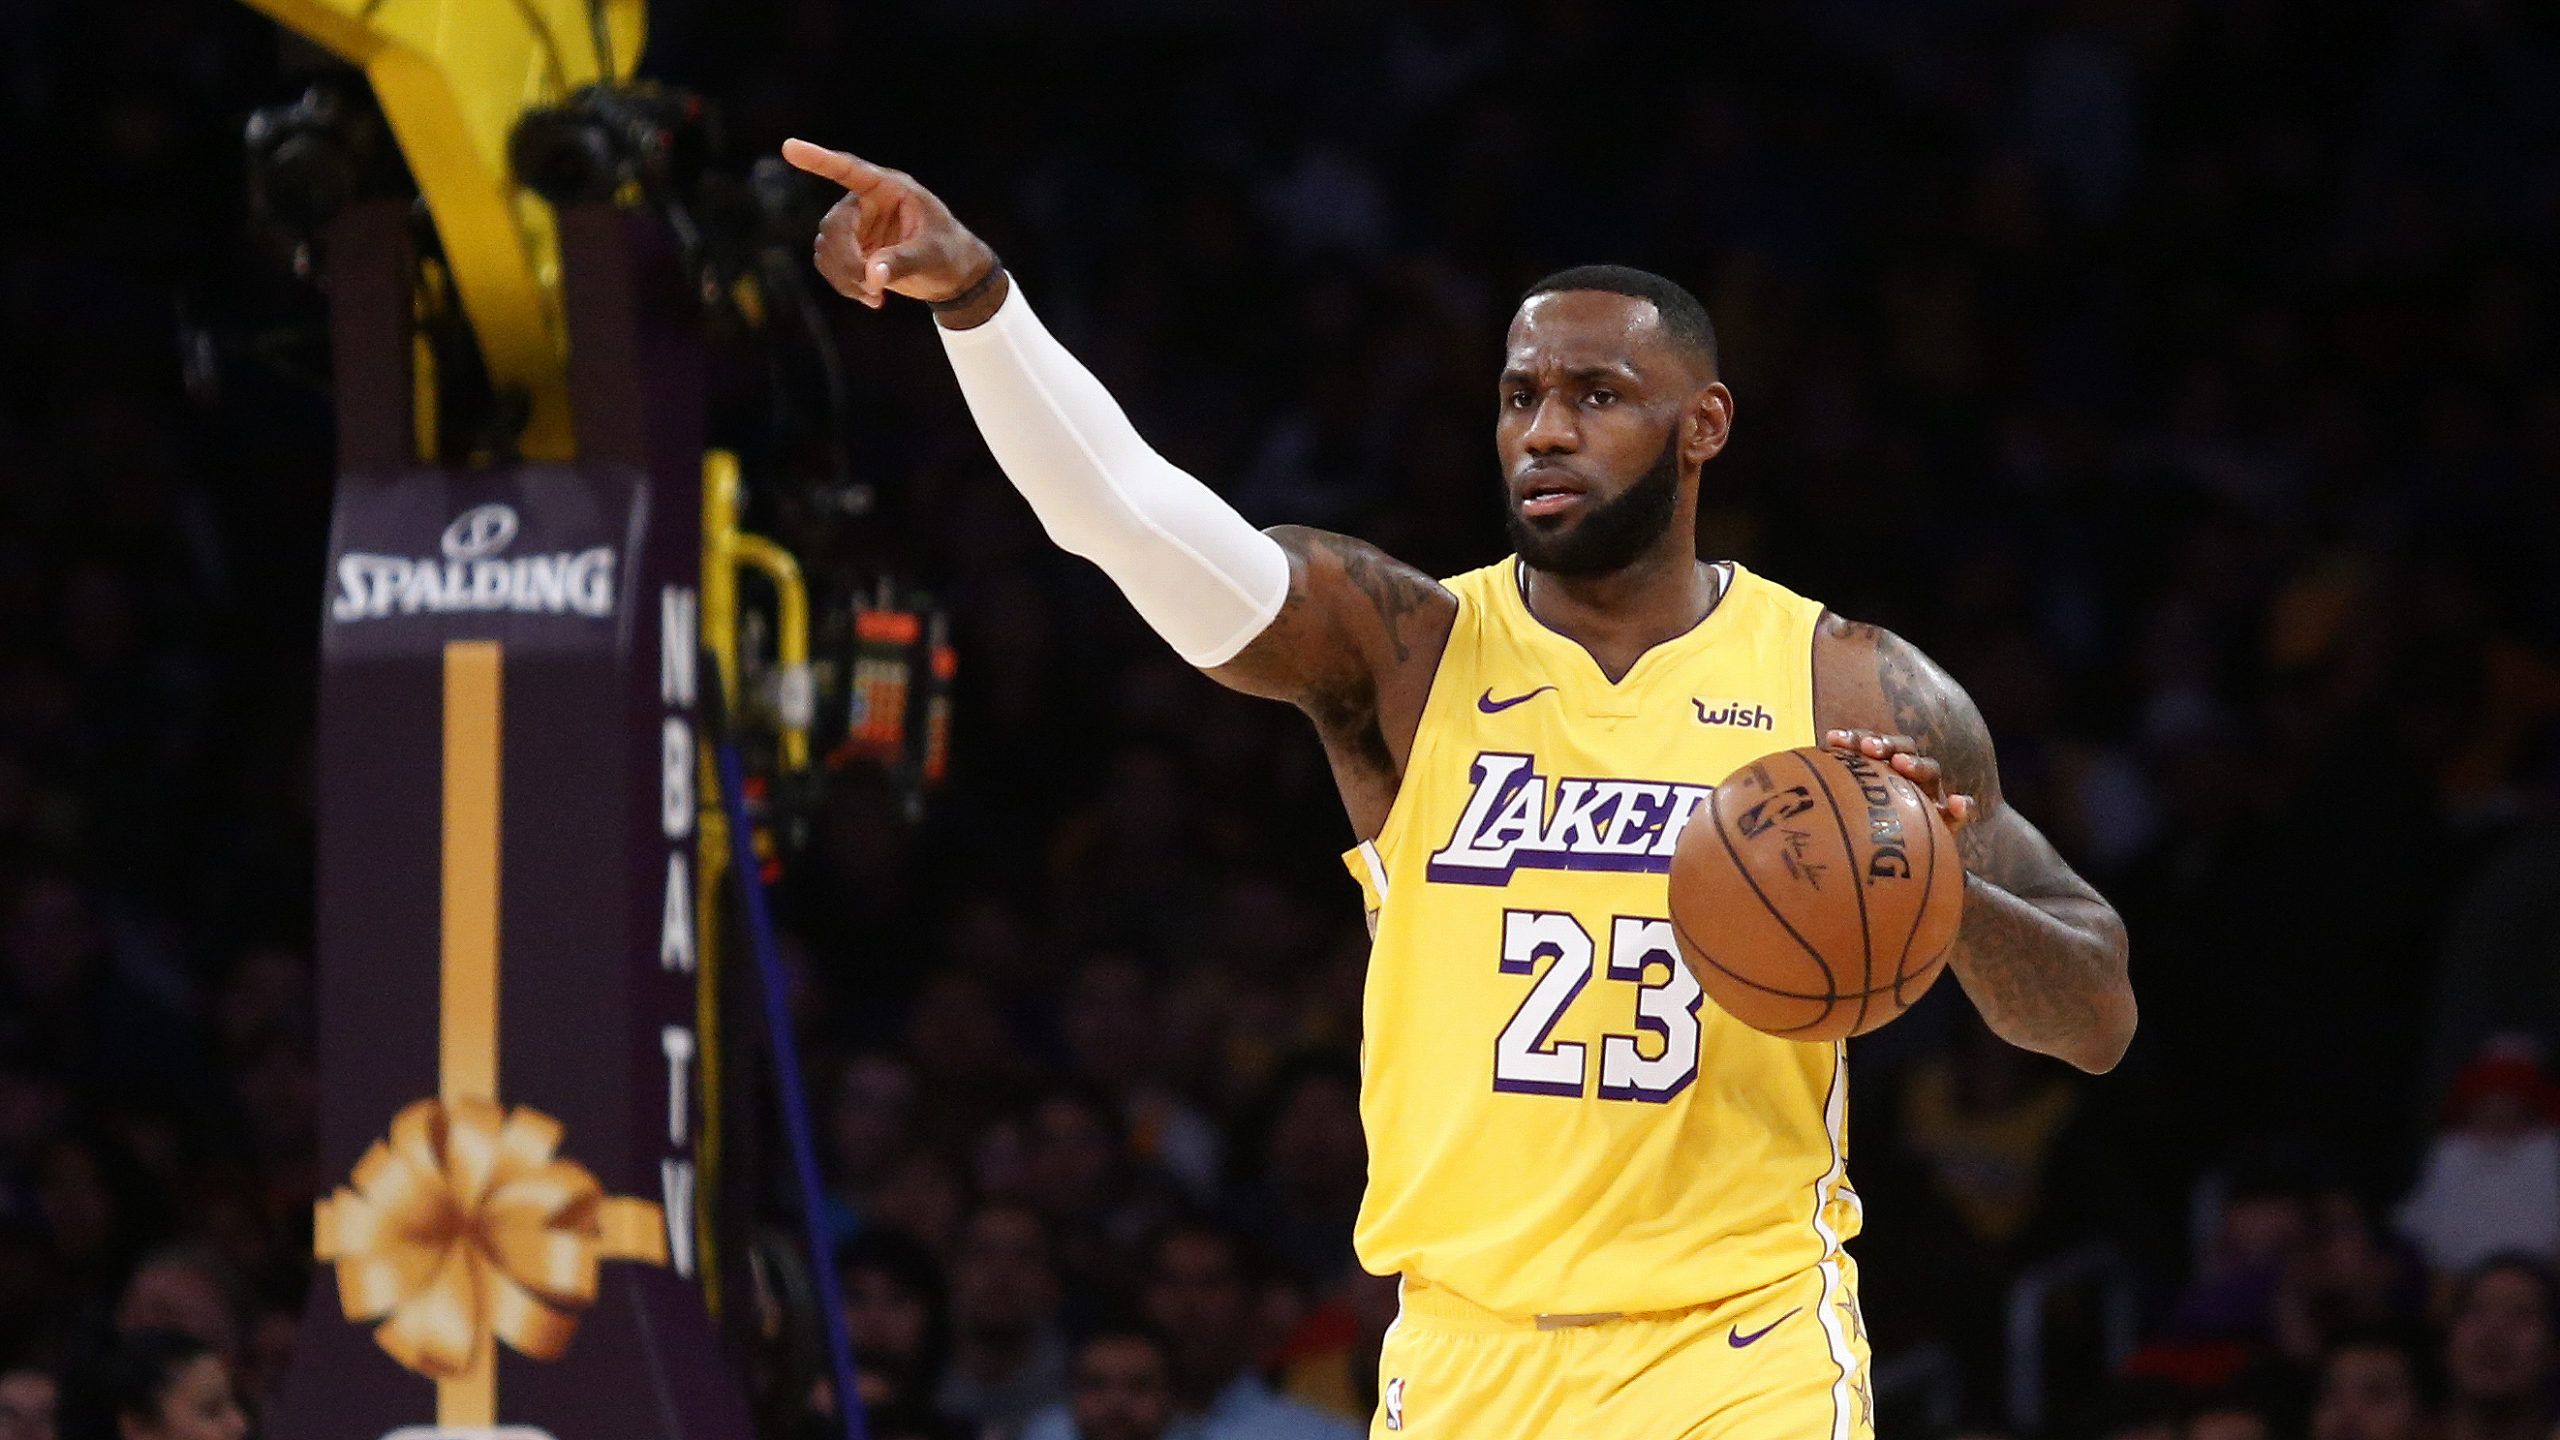 Lakers Star Lebron James Adds Another Accolade to His Magnificent List of Career Achievements